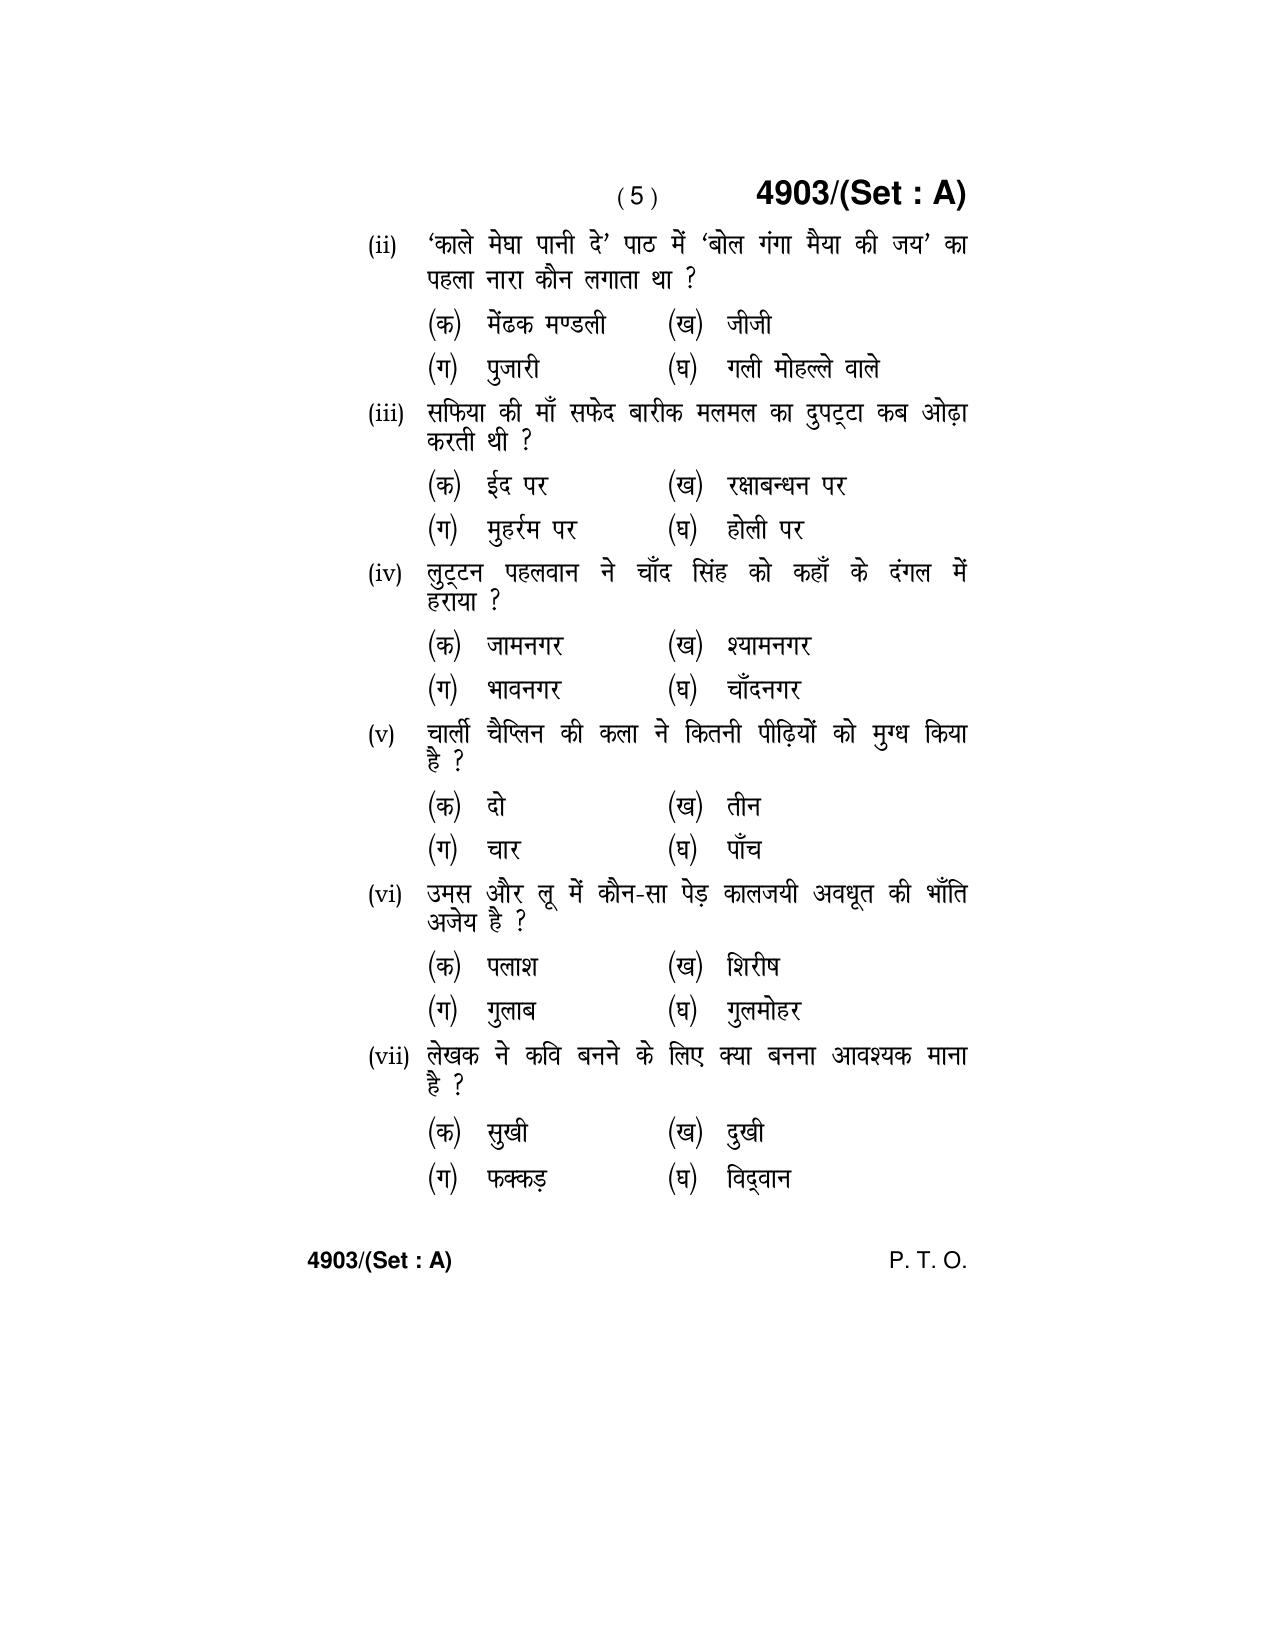 Haryana Board HBSE Class 12 Hindi Core 2020 Question Paper - Page 5